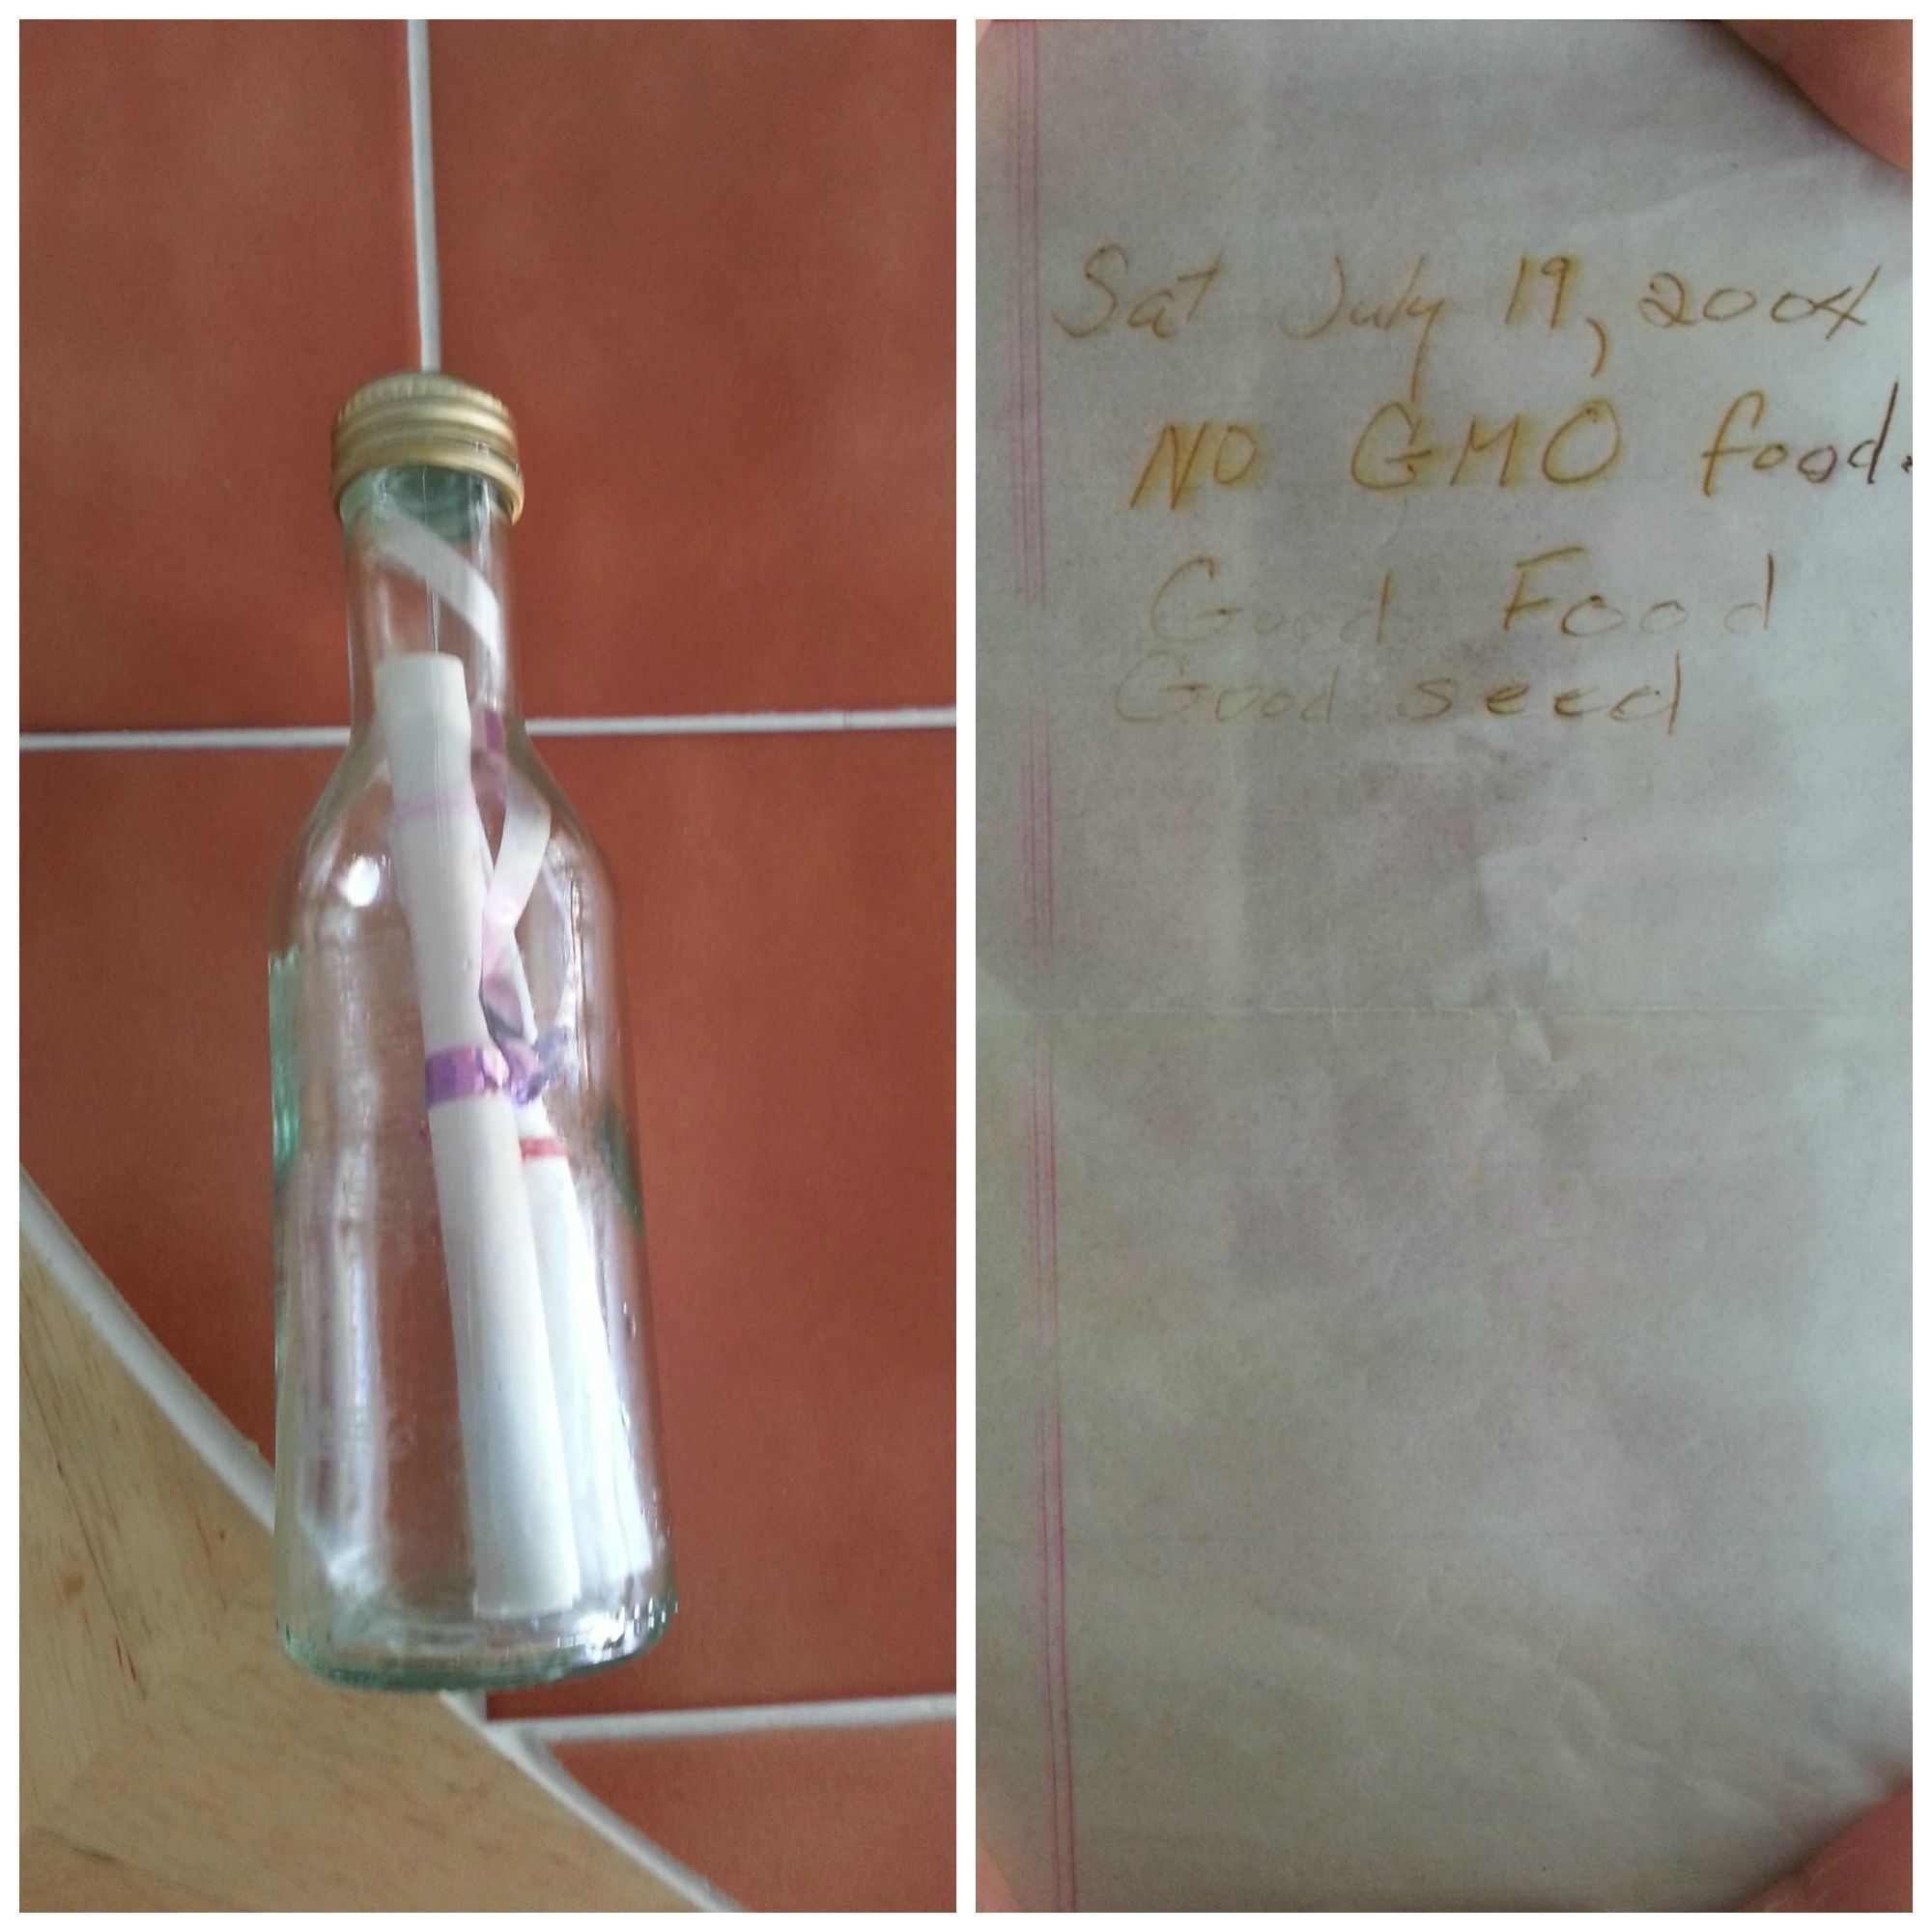 20 messages actually found in bottles